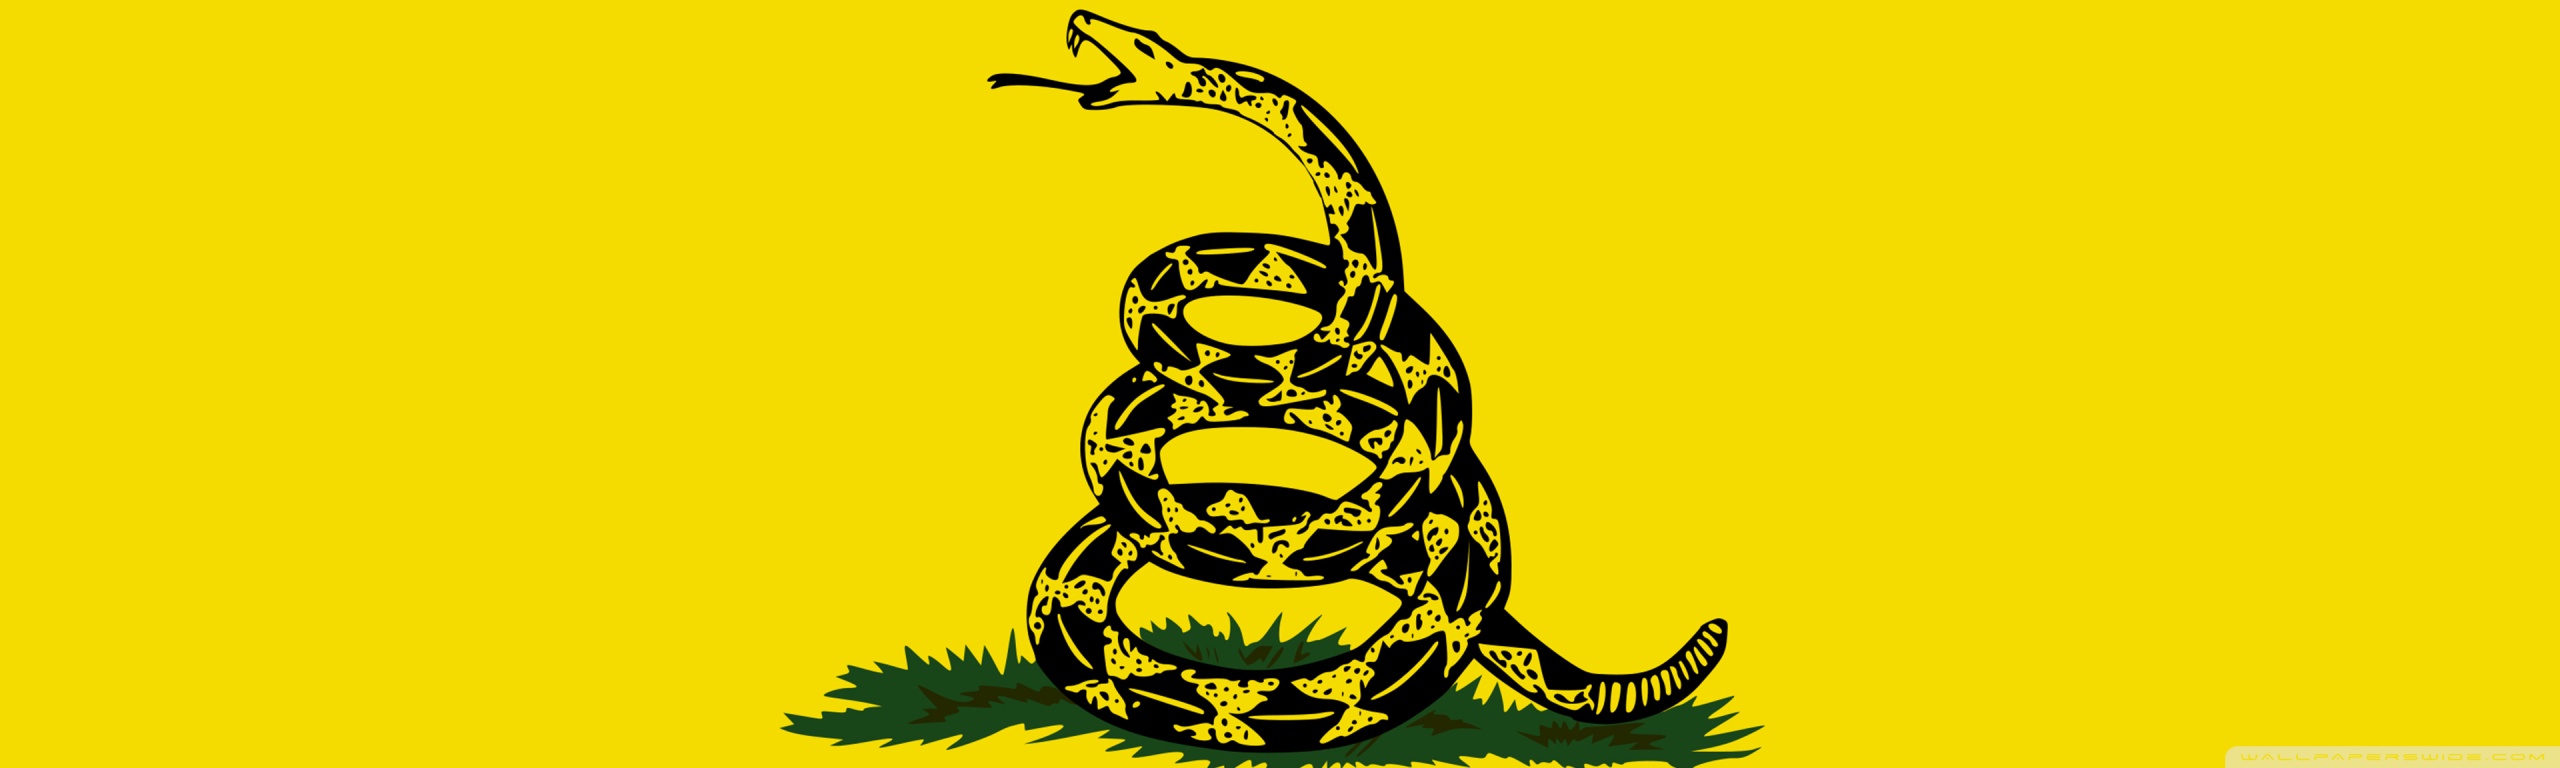 Download 21 don-t-tread-on-me-iphone-wallpaper 134-Best-Dont-Tread-On-Me-images-in-2019-Dont-tread-on-me-.jpg